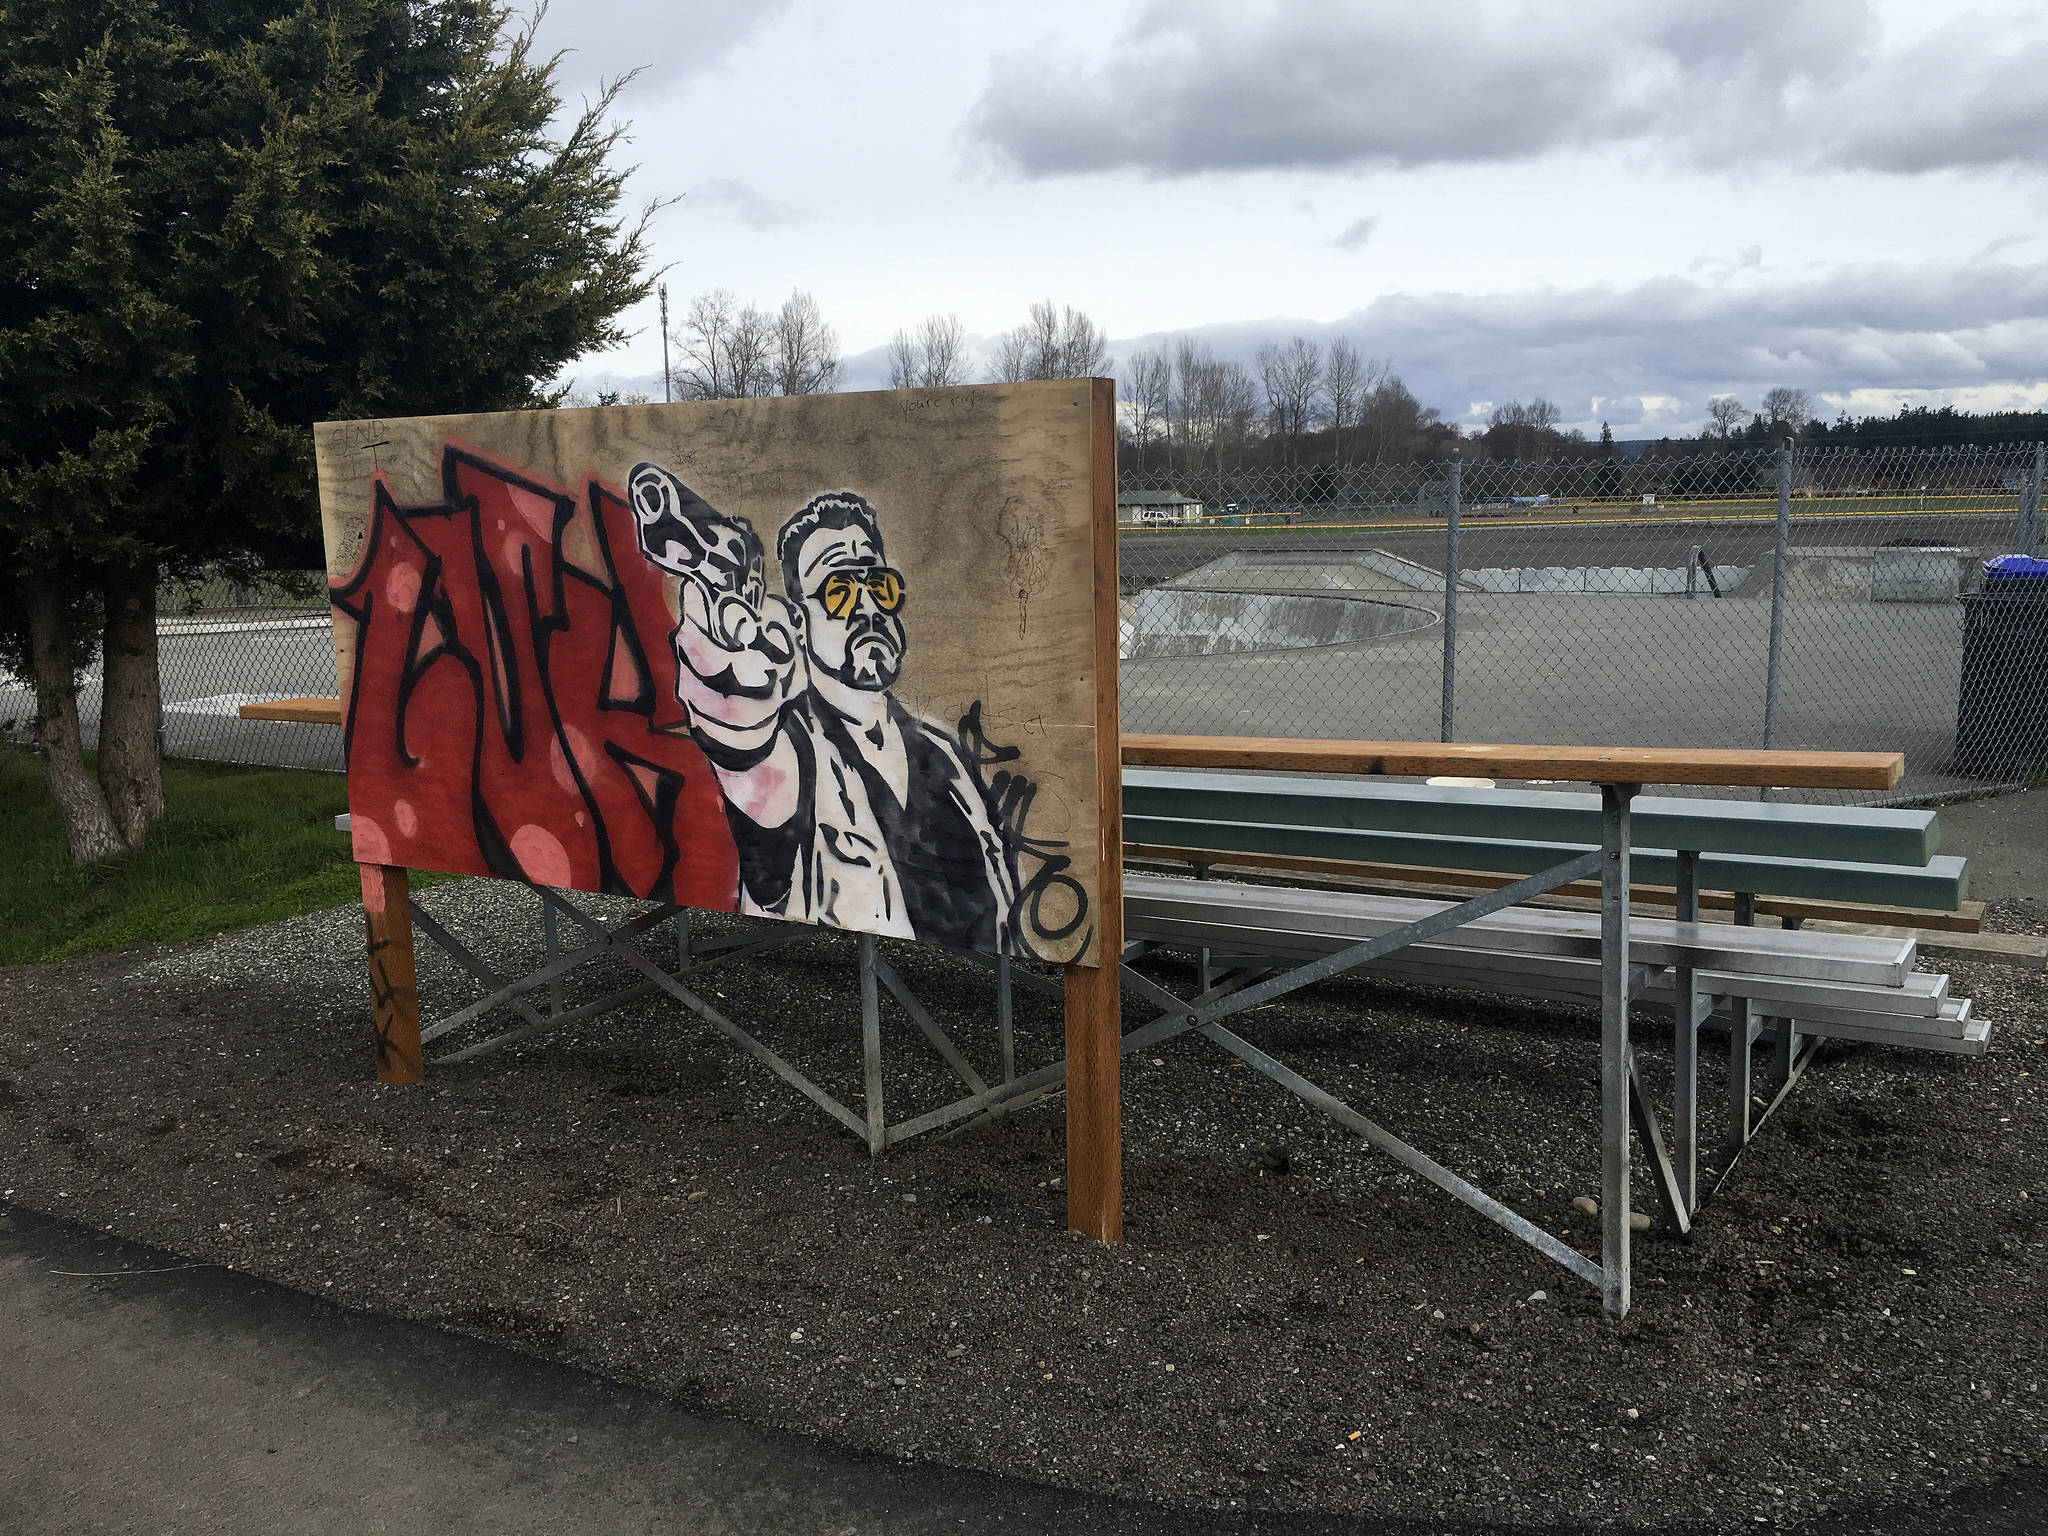 City of Sequim staff say a graffiti board at the Sequim Skate Park has mostly deterred graffiti in the park since late 2012. However a recent image depicting a gun has angered locals leading city staff to enact a policy to paint over the board every two weeks. Sequim Gazette photo by Matthew Nash